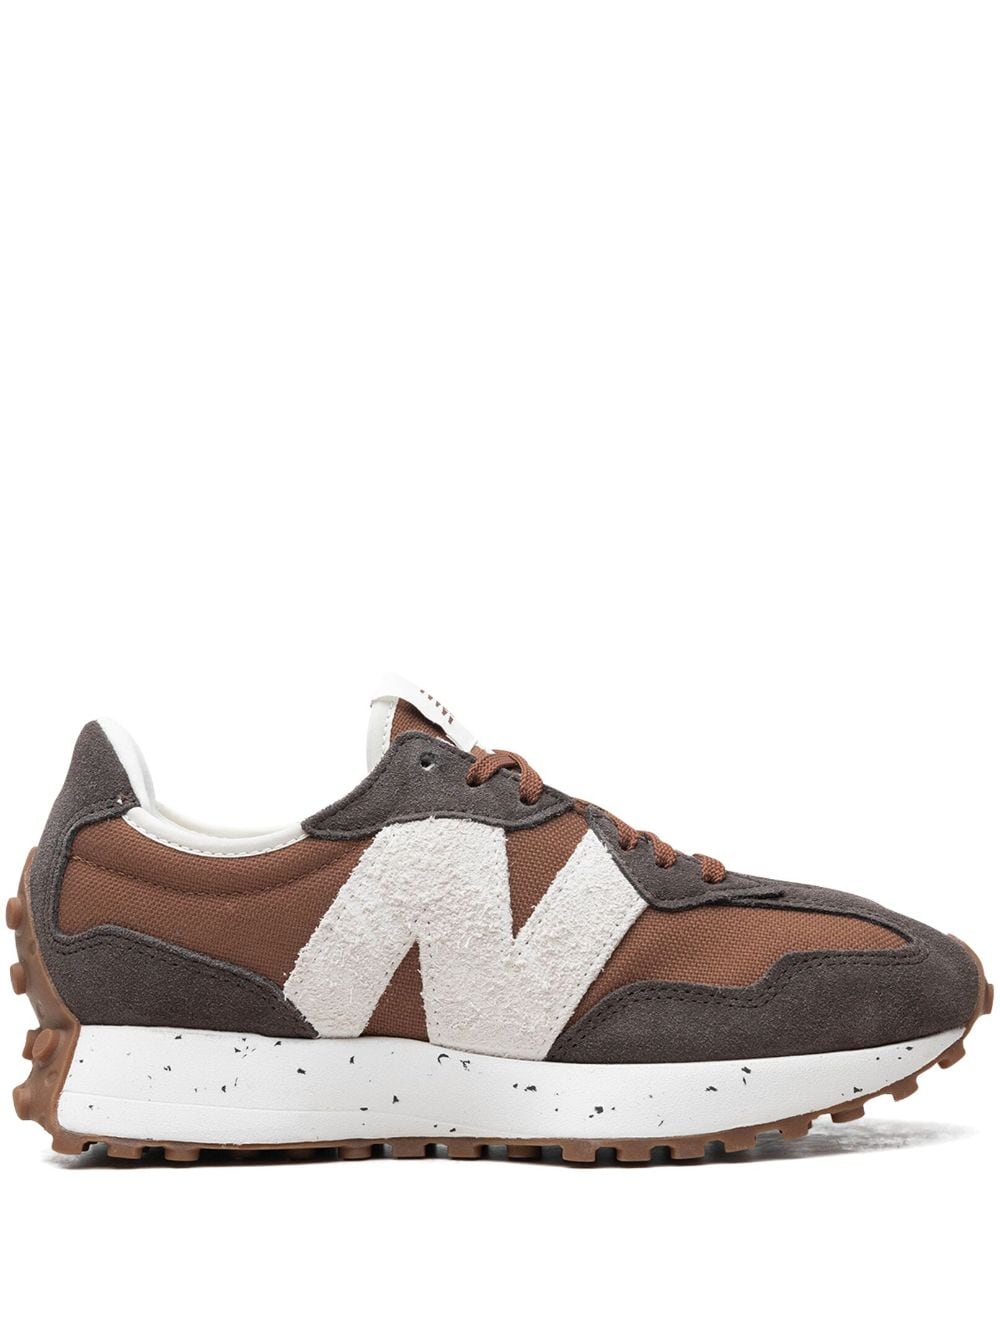 New Balance 327 "Rich Earth" sneakers - Brown